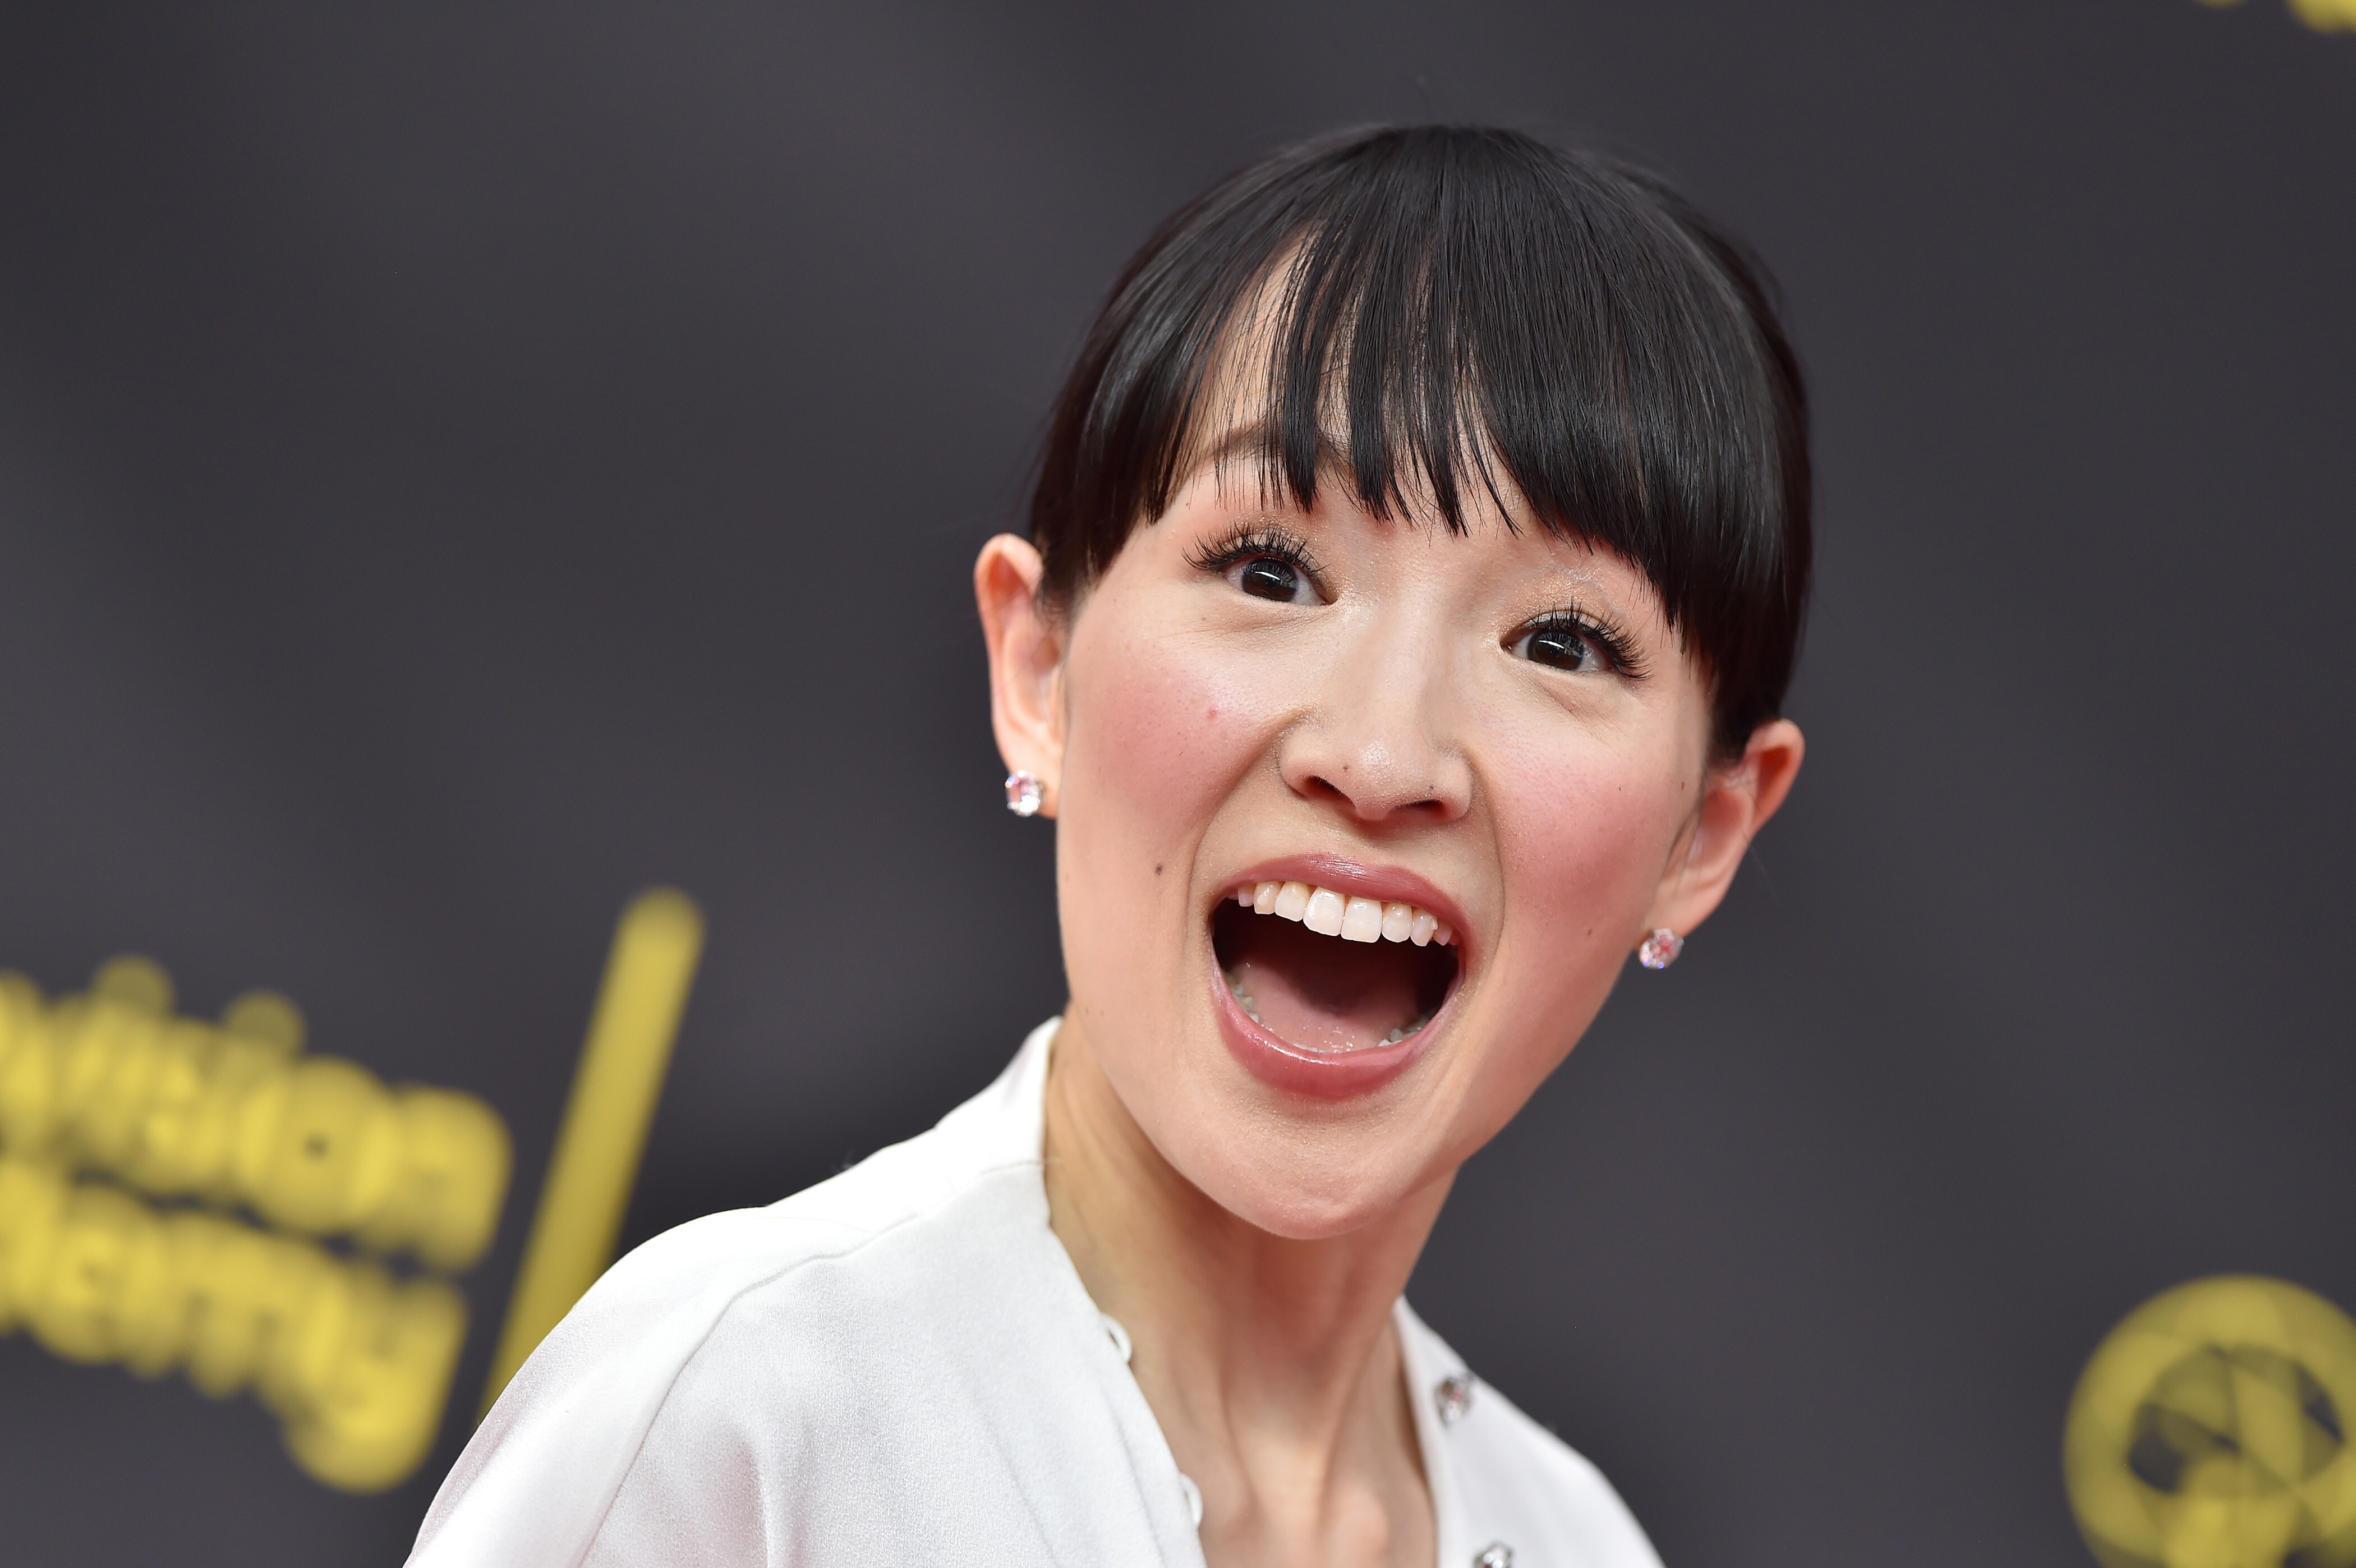 In 'Tidying Up,' Marie Kondo finds joy of her own in helping others - Los  Angeles Times